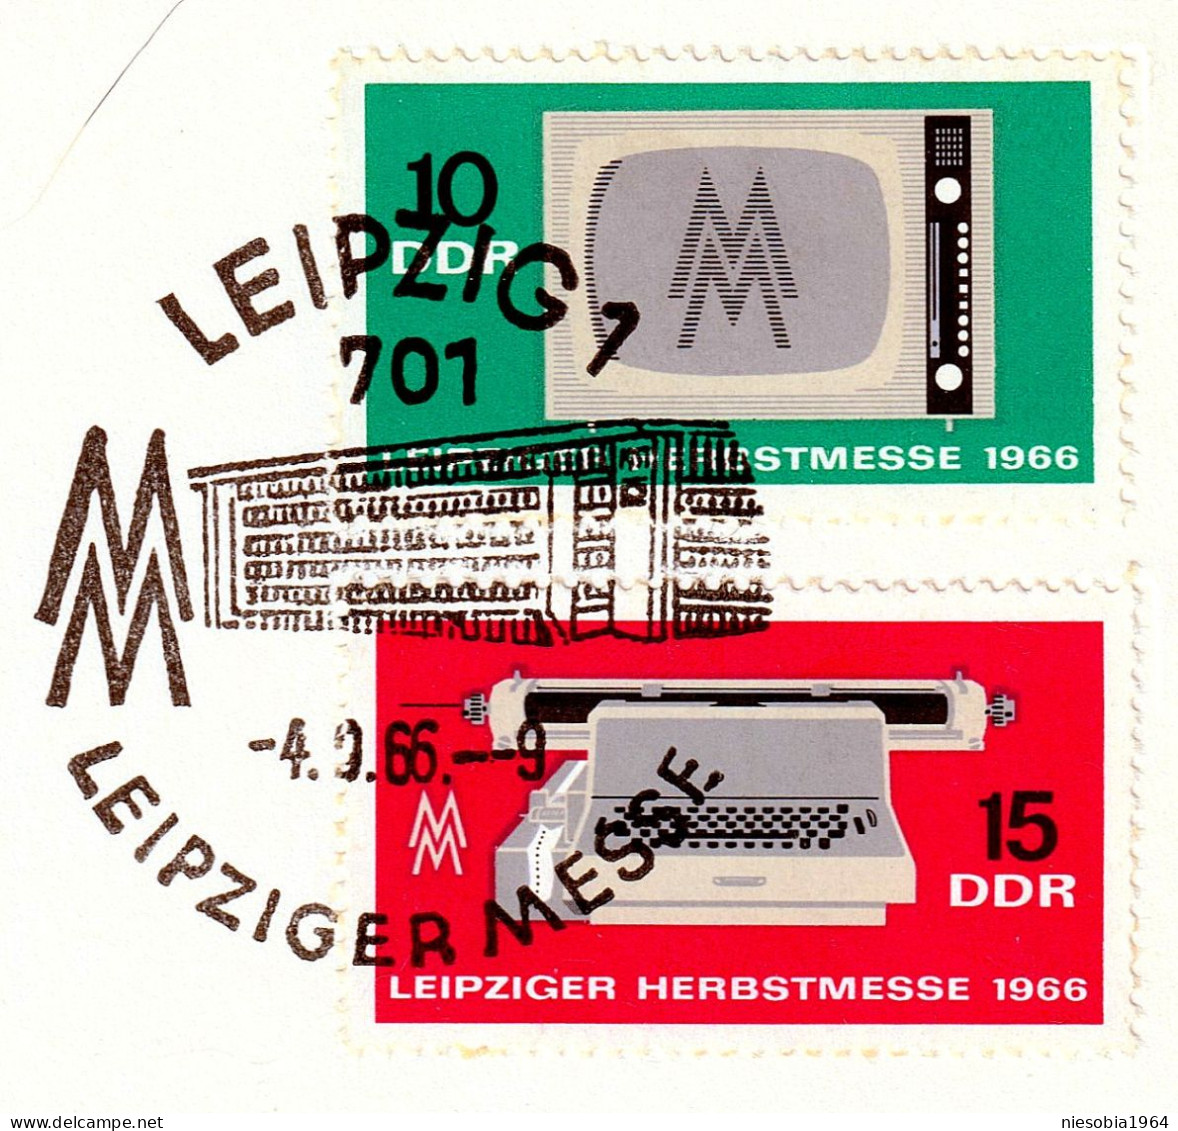 20 Years Of Peace Fair Autumn Fair LEIPZIG 1966 - Two Stamps + Occasional Seals - Cartes Postales - Oblitérées